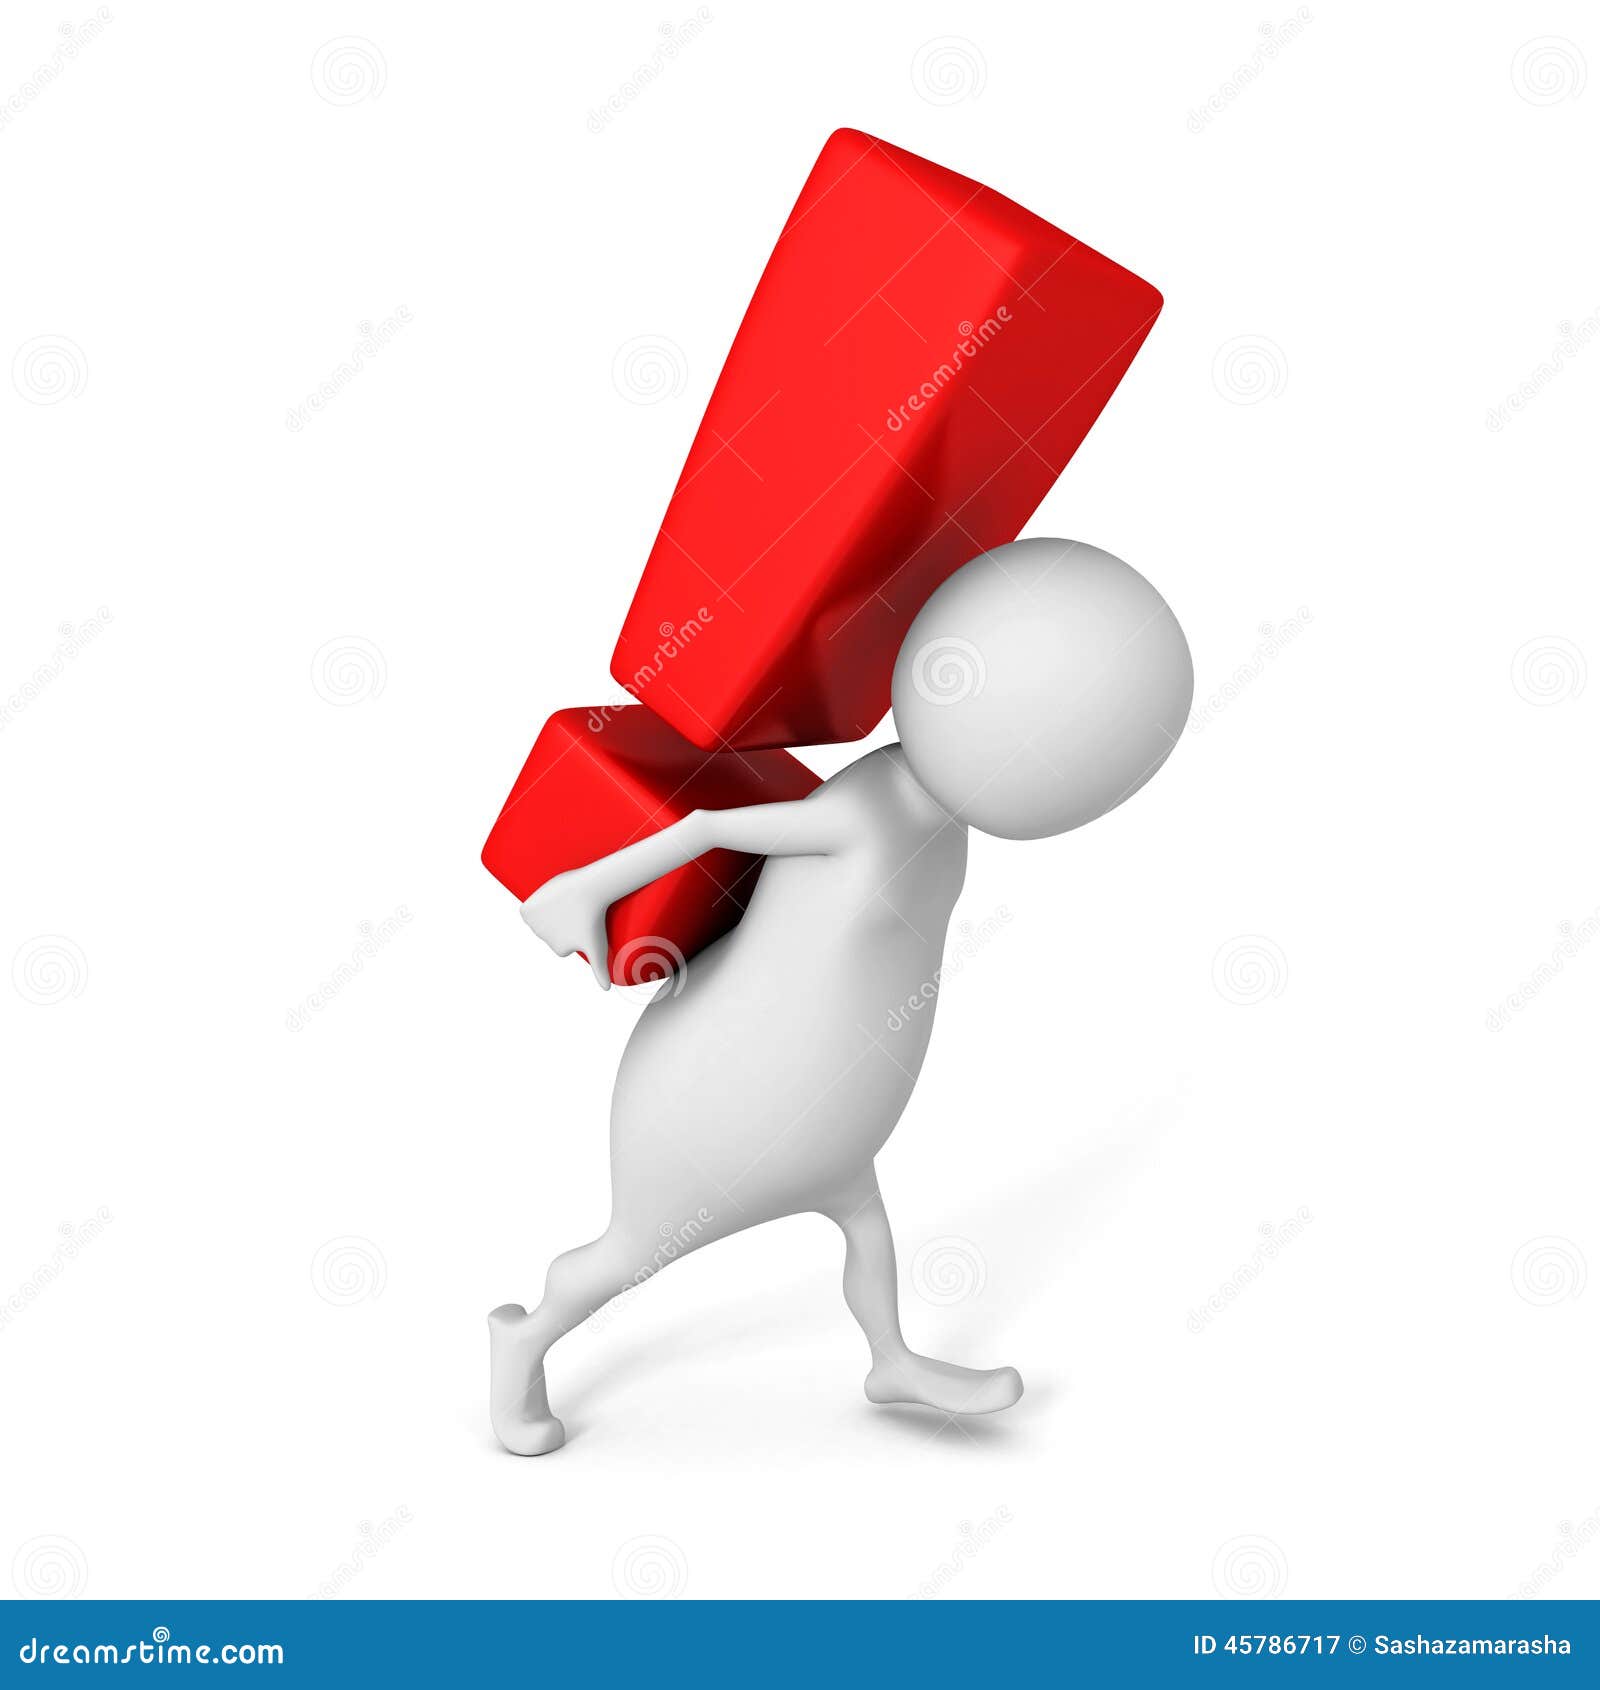 red exclamation mark clipart - photo #20